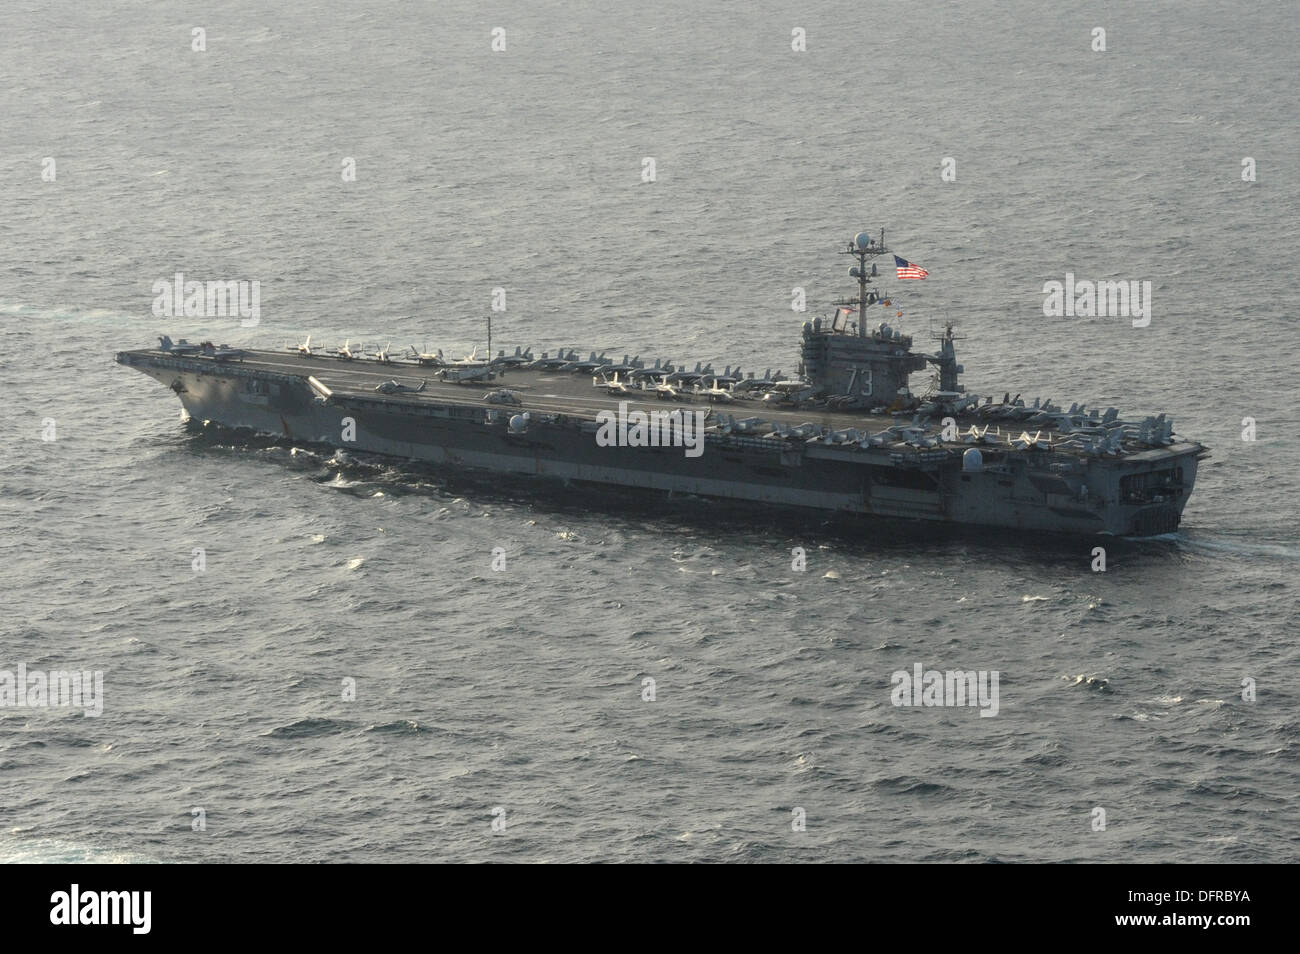 The aircraft carrier USS George Washington (CVN 73), flagship of the George Washington Carrier Strike Group, is conducting exercises with the Republic of Korea navy to strengthen maritime interoperability and U.S.-ROK alliance. Stock Photo